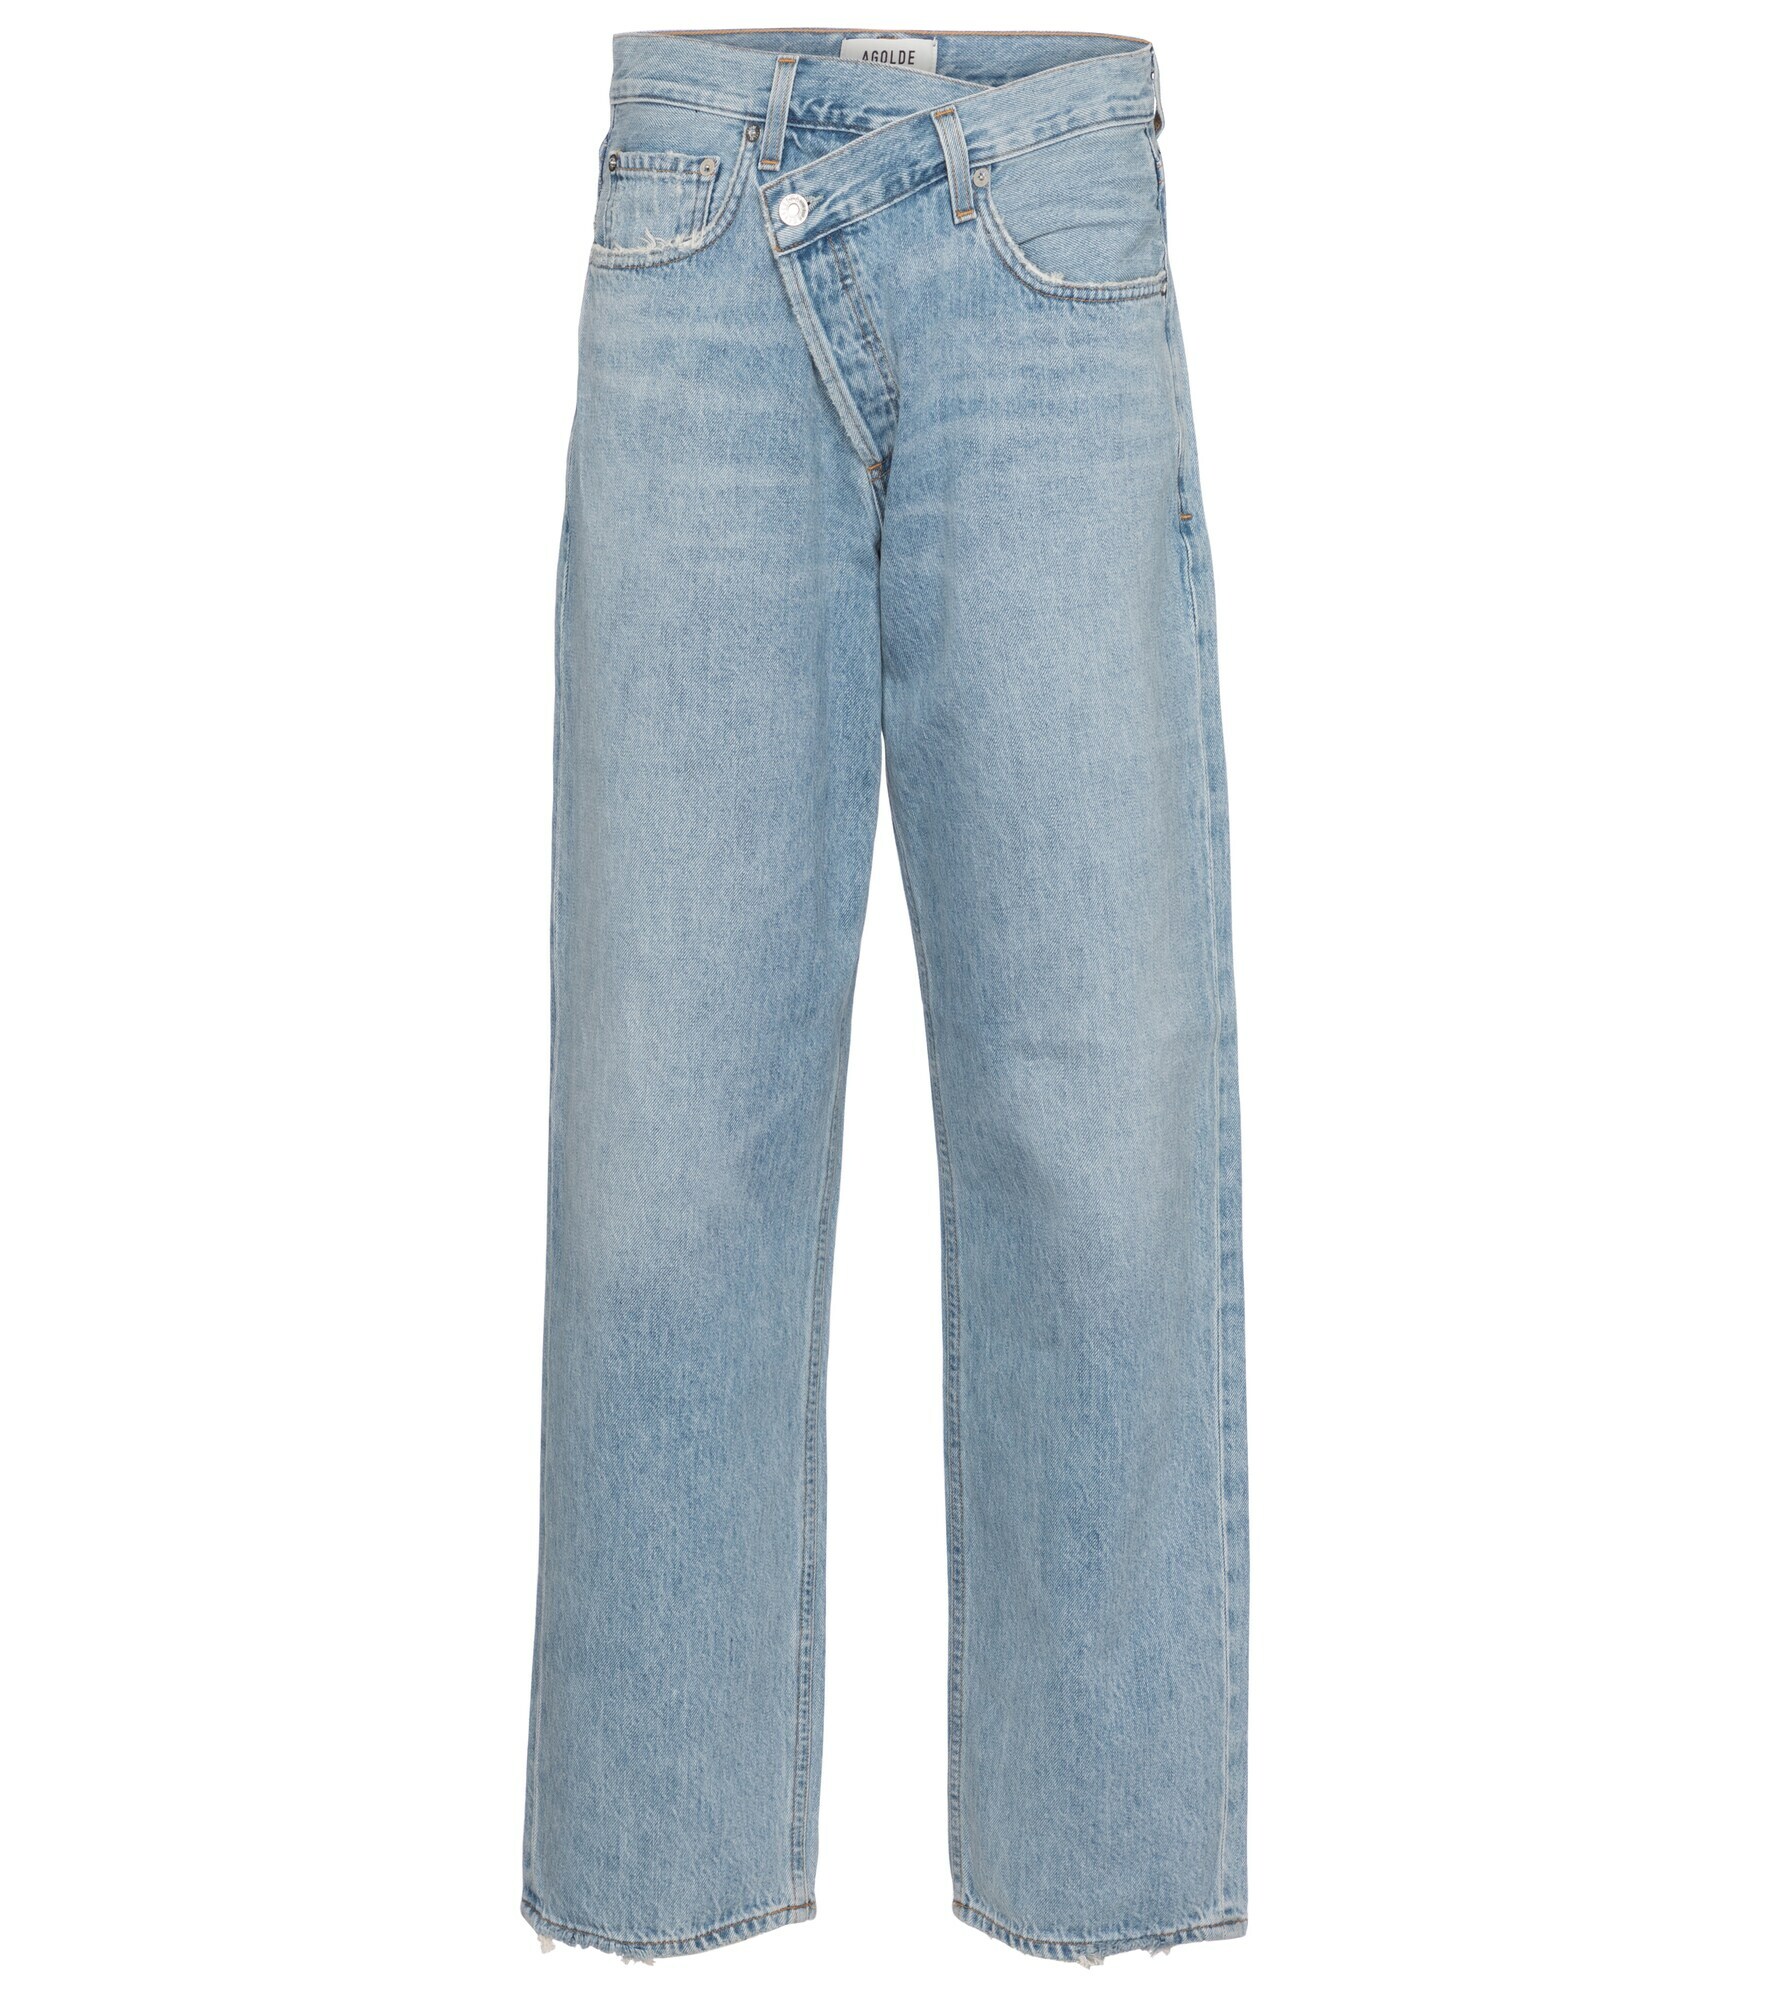 Agolde - Criss-Cross mid-rise straight jeans AGOLDE